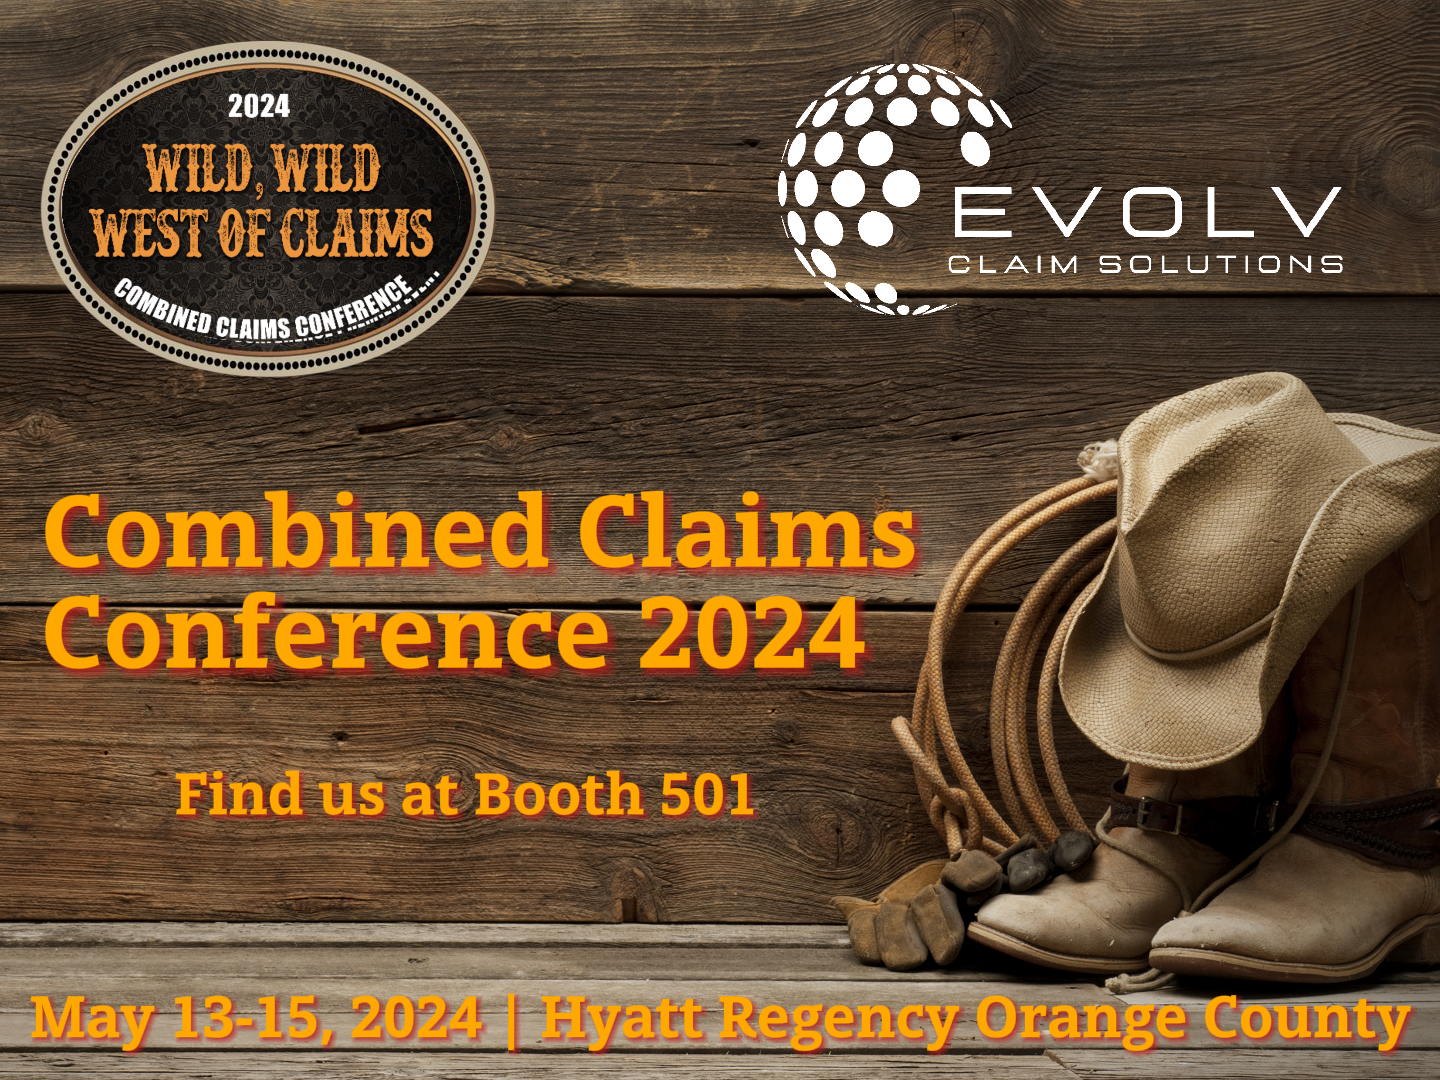 Come see Evolv Claim Solutions at Combined Claims Conference